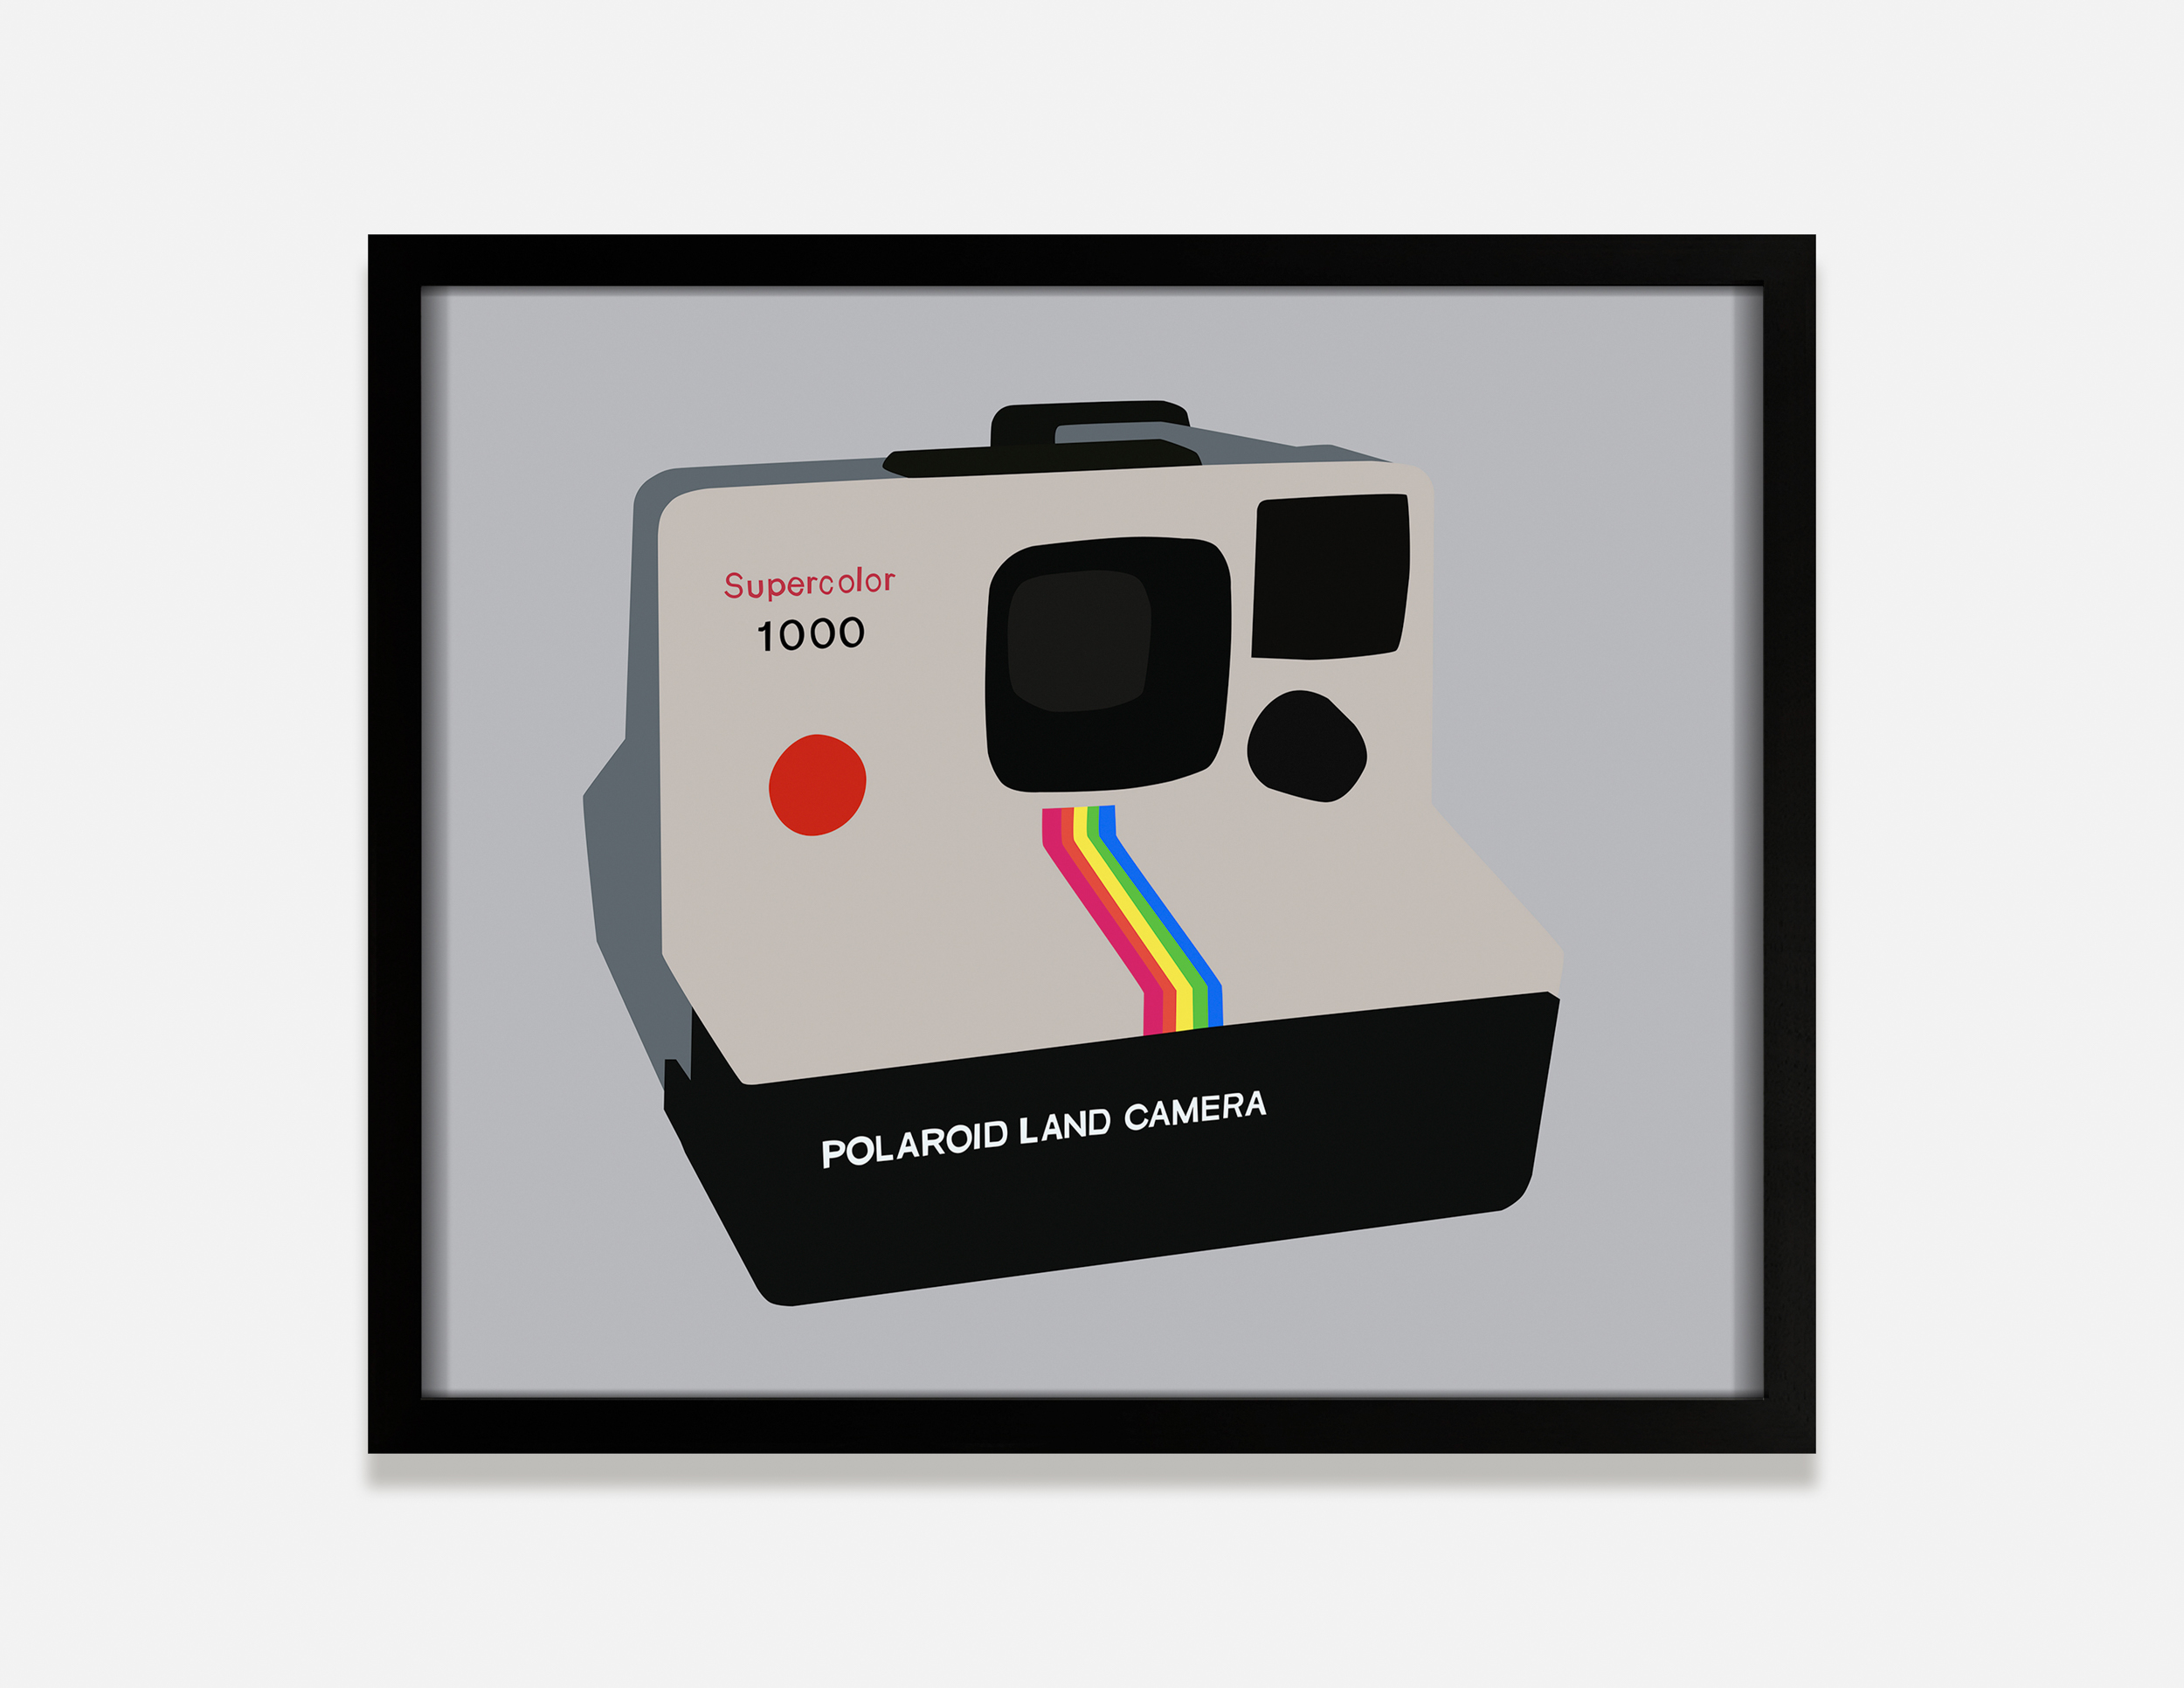 Color image of a color transparency on a light box depicting a Polaroid land camera against a grey background